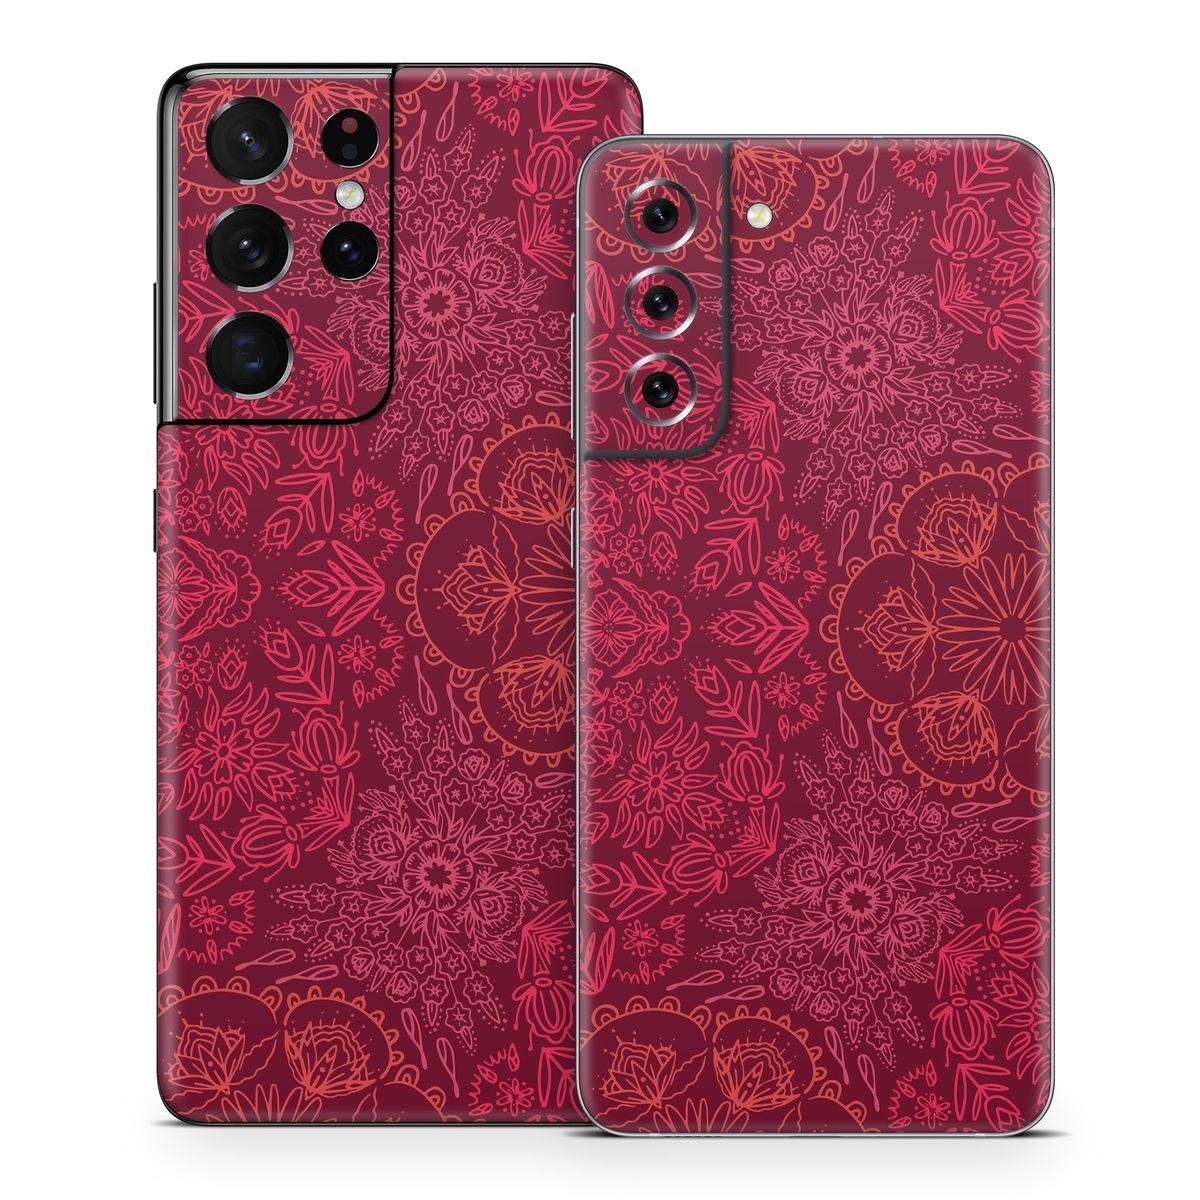 Samsung Galaxy S21 Series Skin design of Red, Pattern, Pink, Magenta, Purple, Maroon, Violet, Textile, Design, Wallpaper, with red, black colors